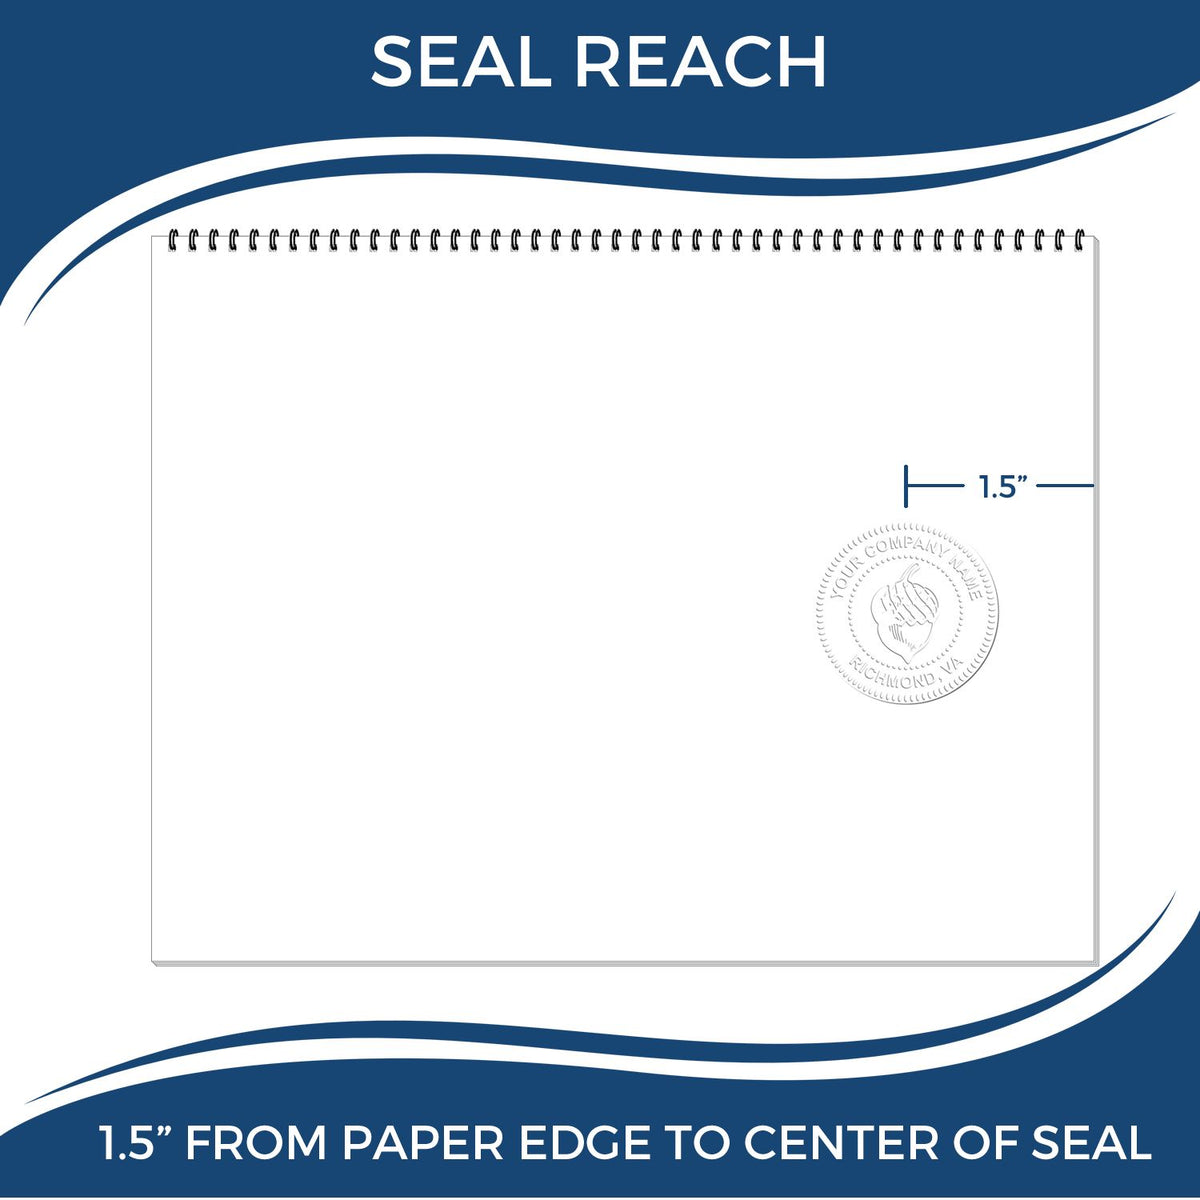 An infographic showing the seal reach which is represented by a ruler and a miniature seal image of the Gift Missouri Engineer Seal